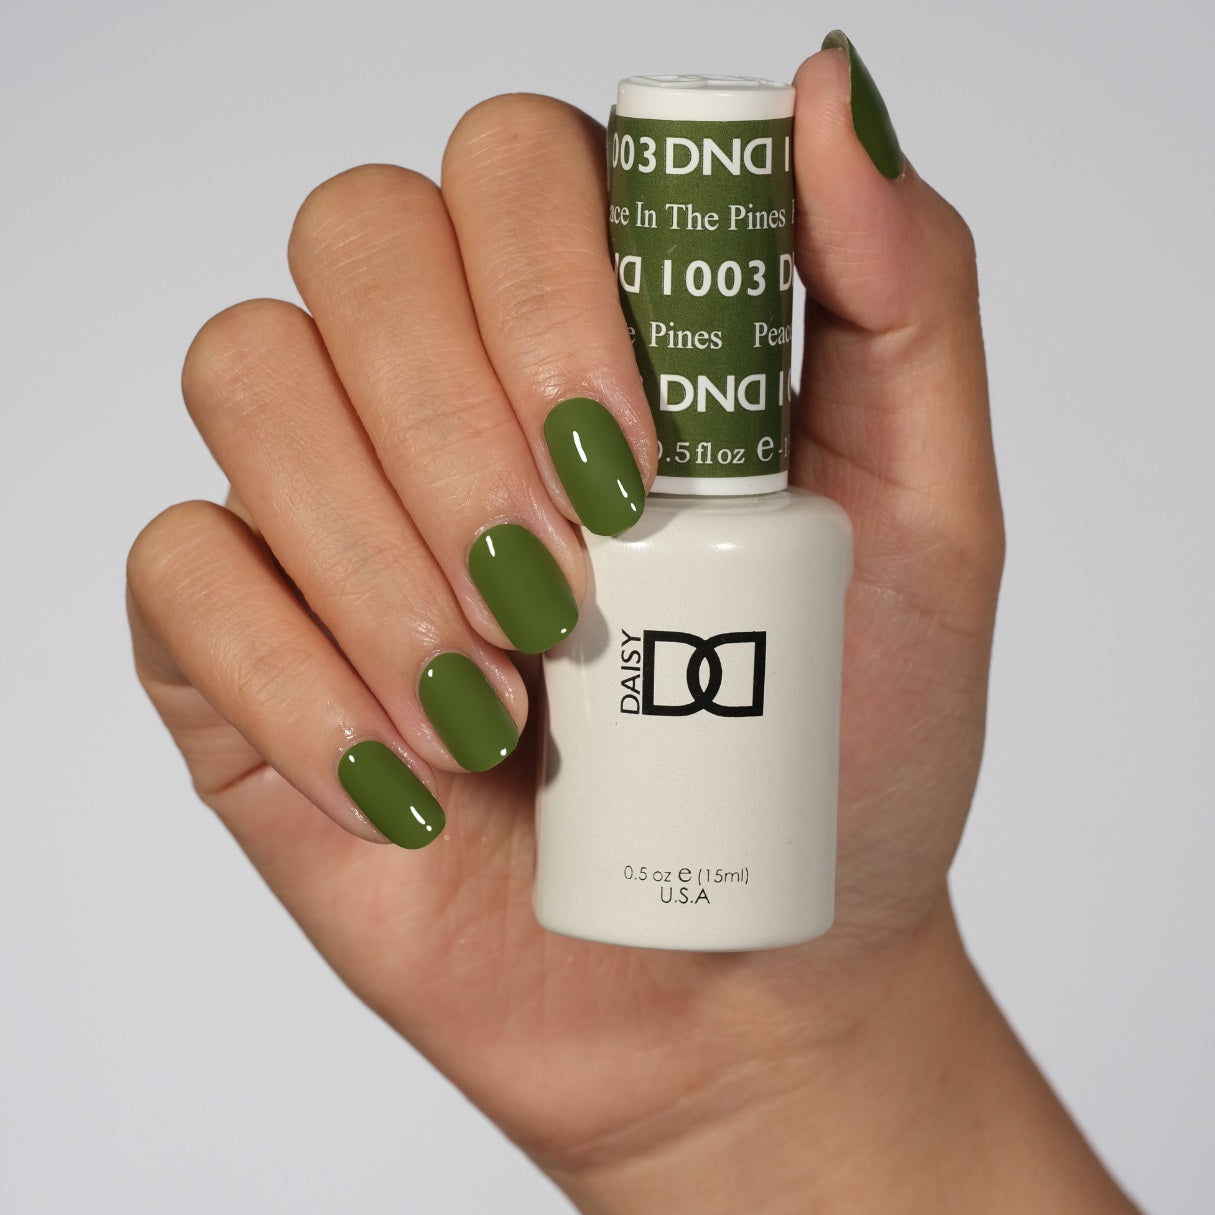 DND Daisy Gel Duo - Peace in the Pines #1003 - Universal Nail Supplies